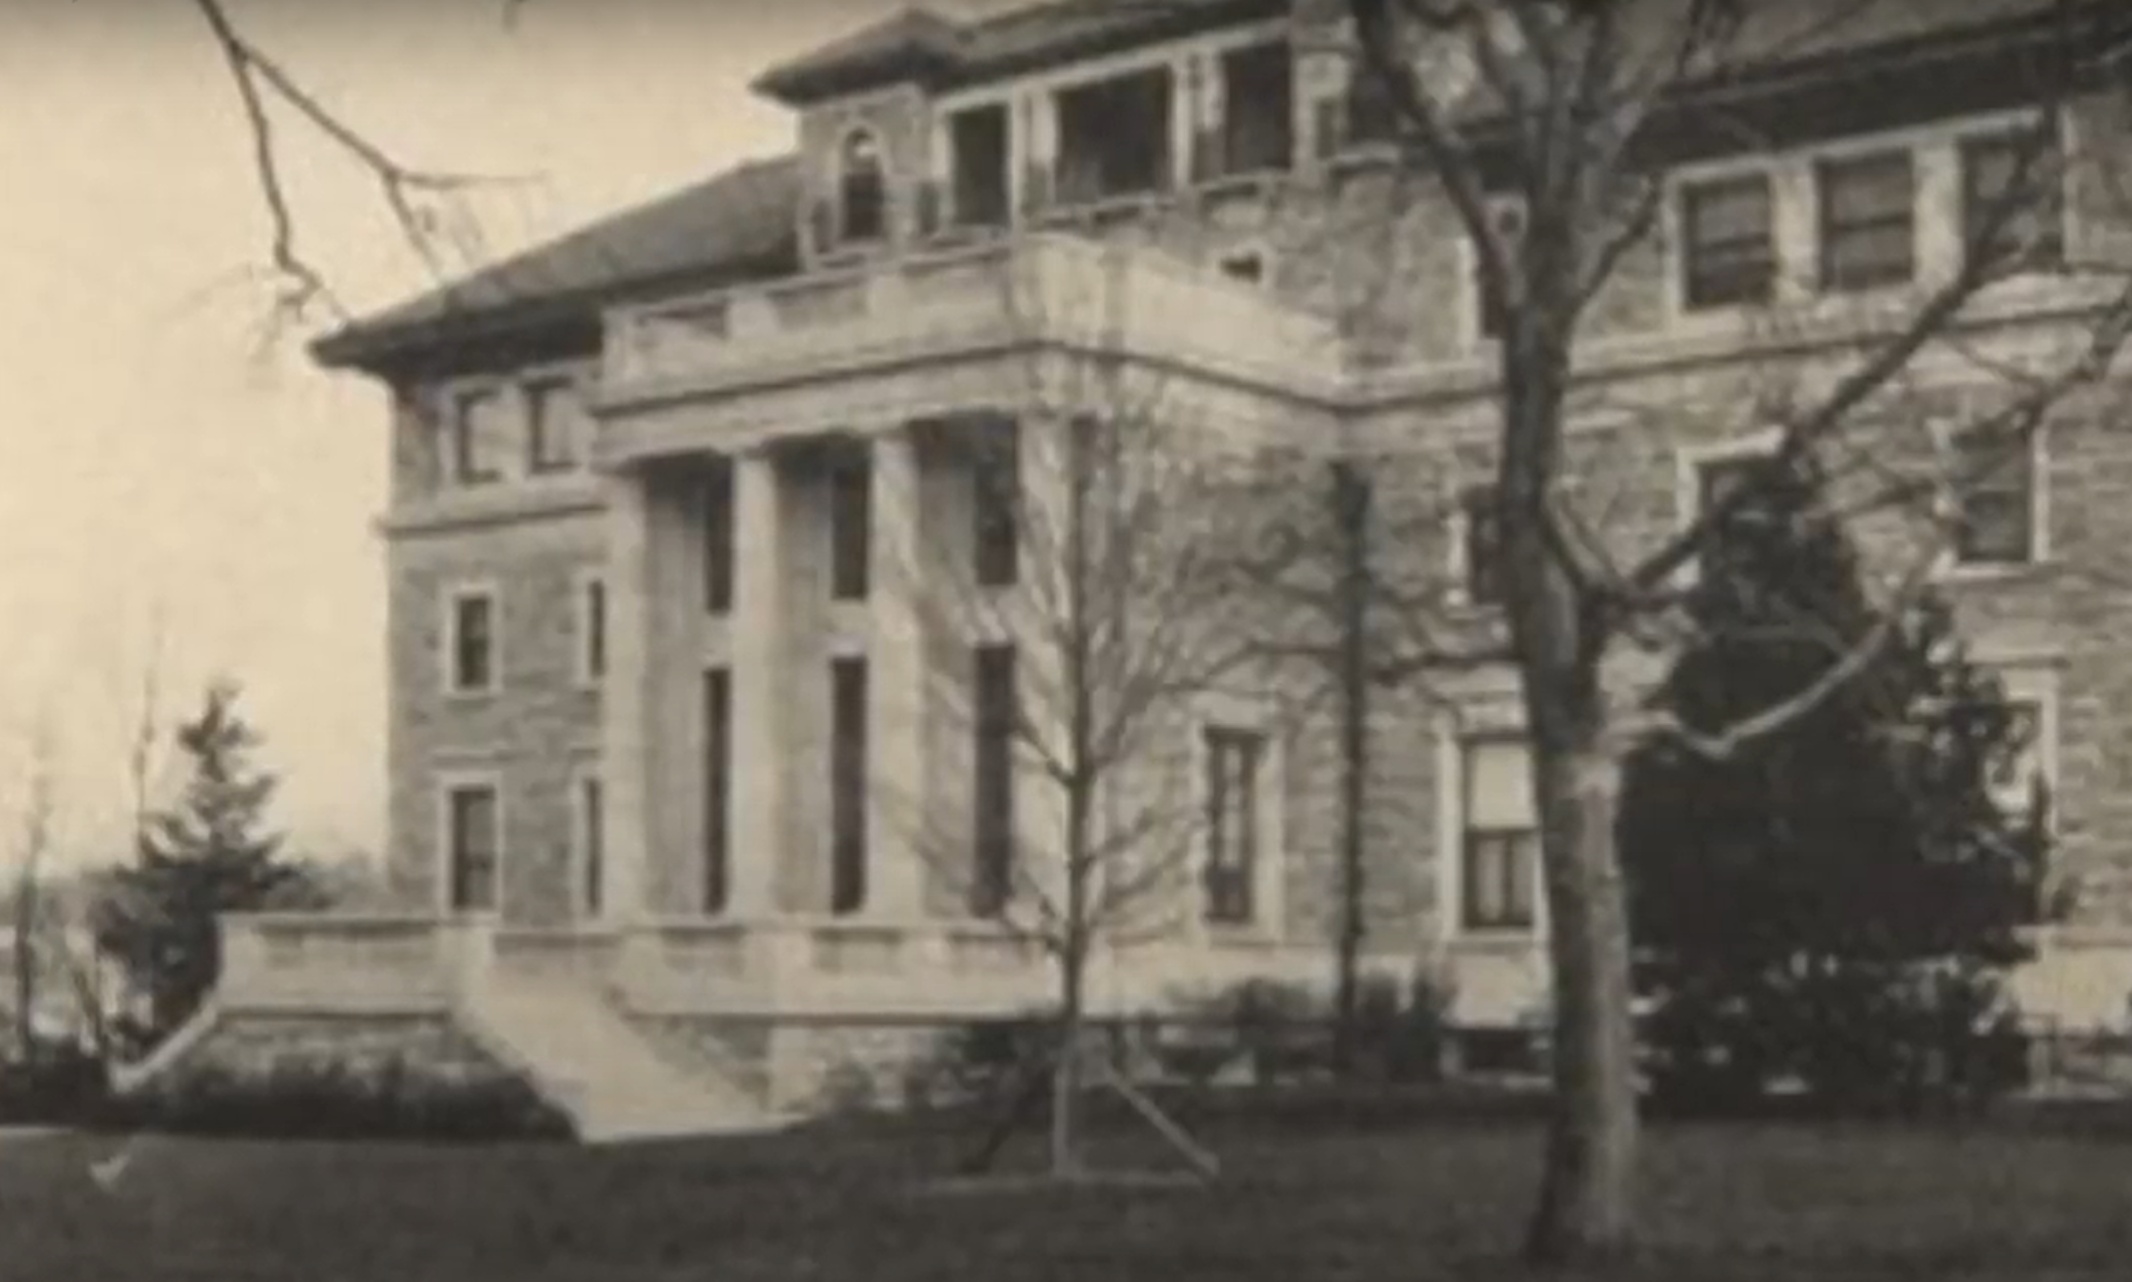 Archive black and white image of Dickey Mansion, what is now called Scofield Hall